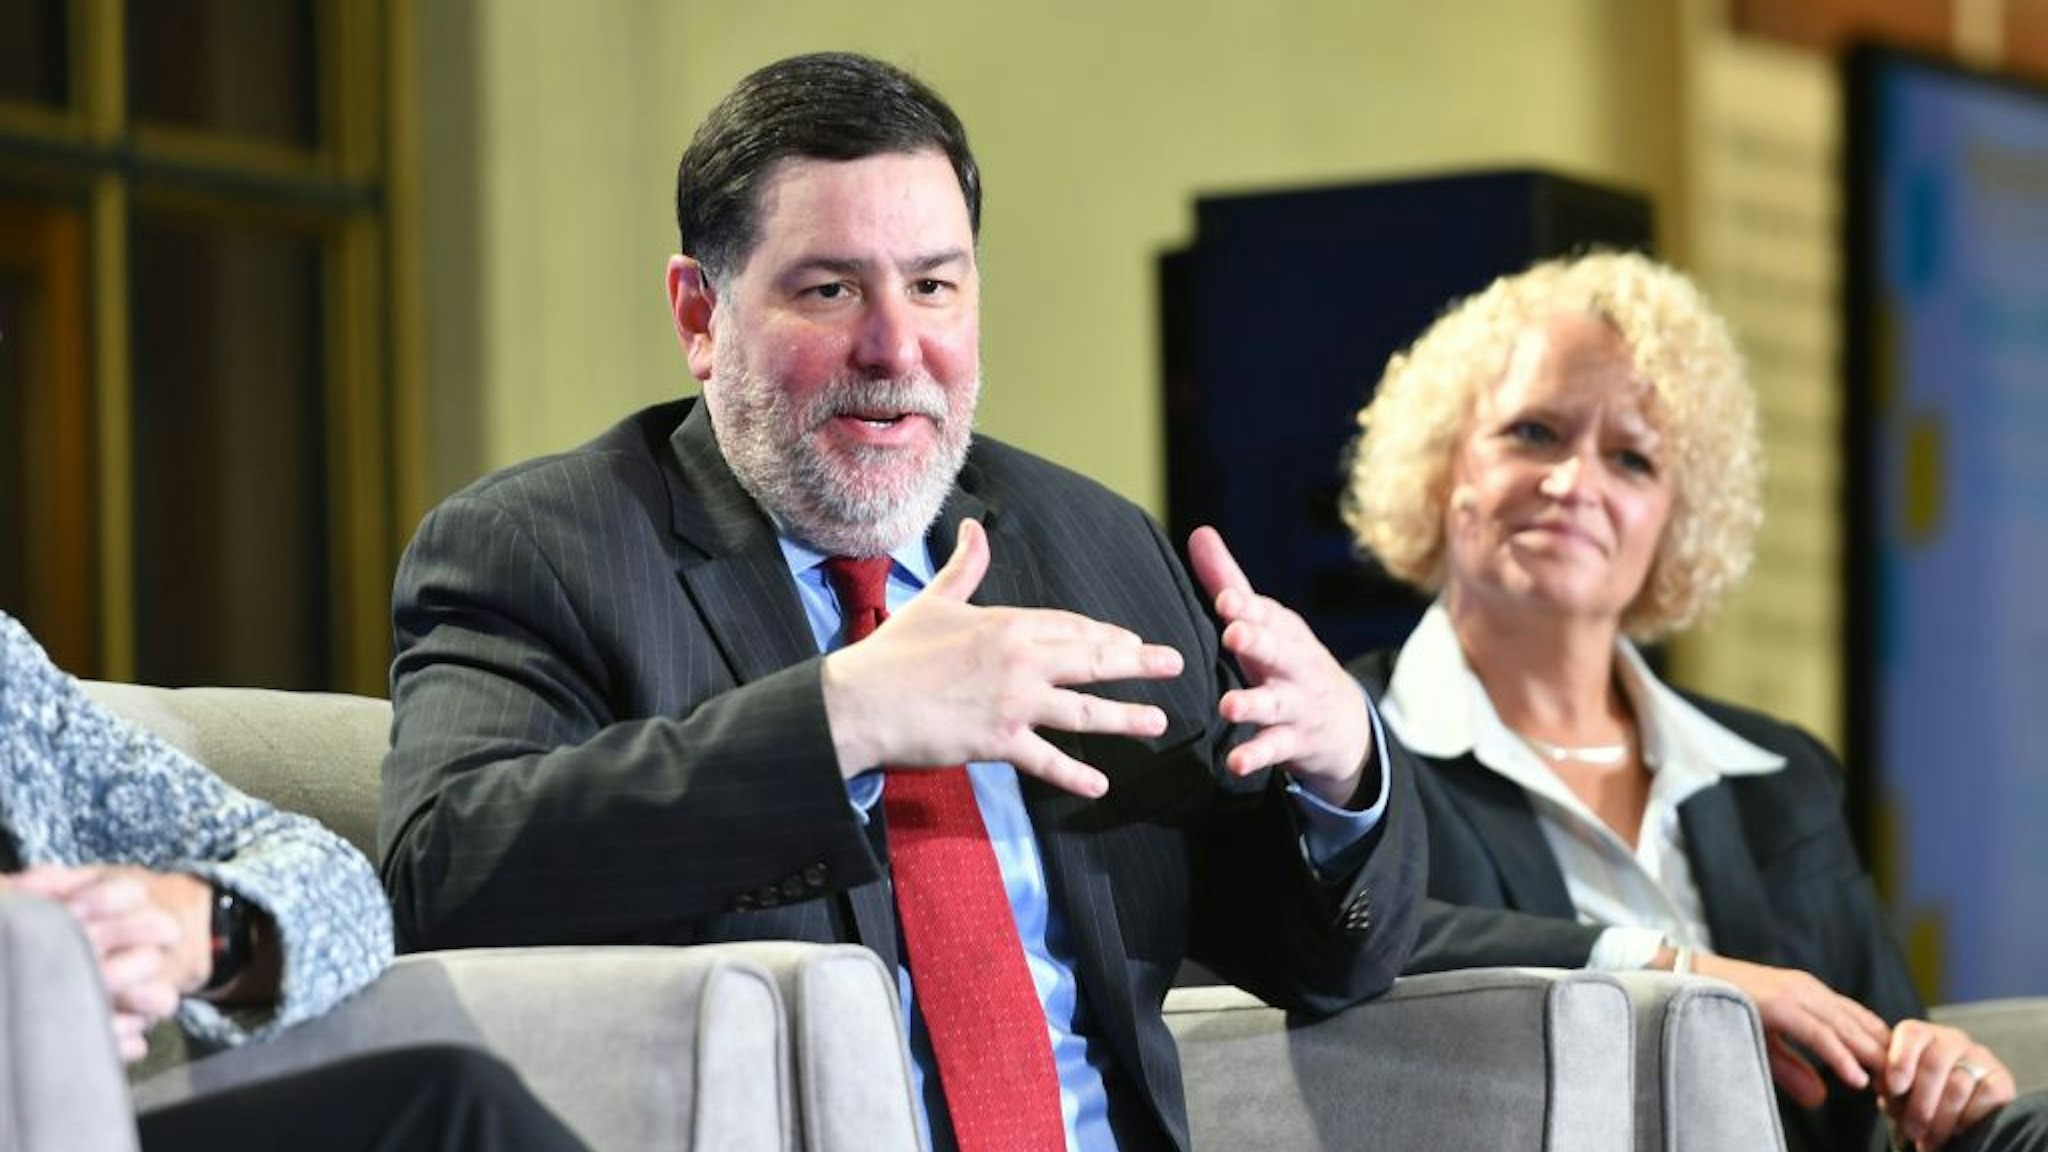 Pittsburgh Mayor Bill Peduto speaks during a panel discussion at the C40 Cities For Climate The Future Is Us kickoff event at San Francisco's City Hall in San Francisco, California on September 12, 2018.